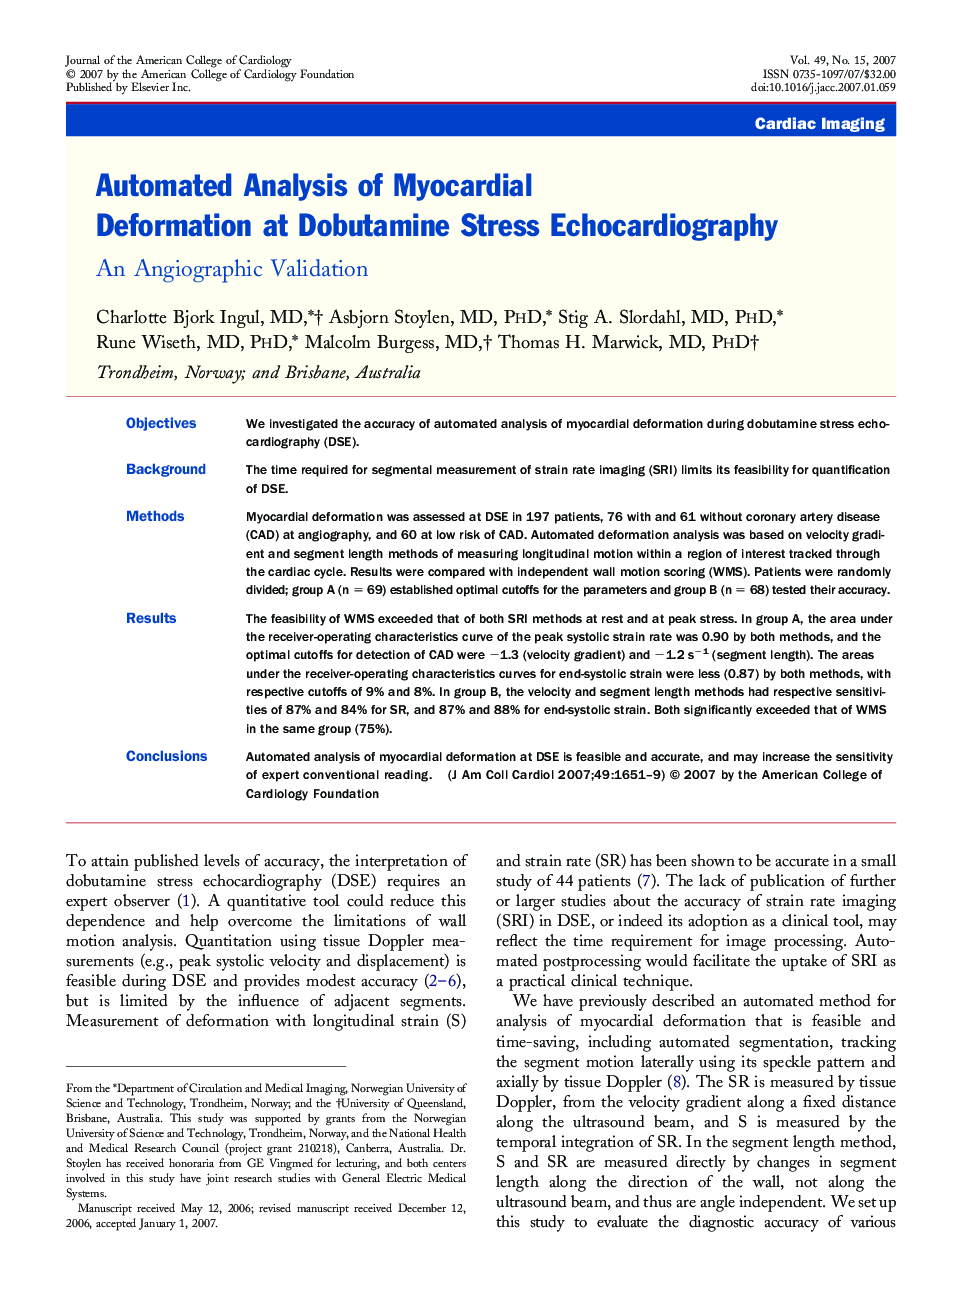 Automated Analysis of Myocardial Deformation at Dobutamine Stress Echocardiography : An Angiographic Validation